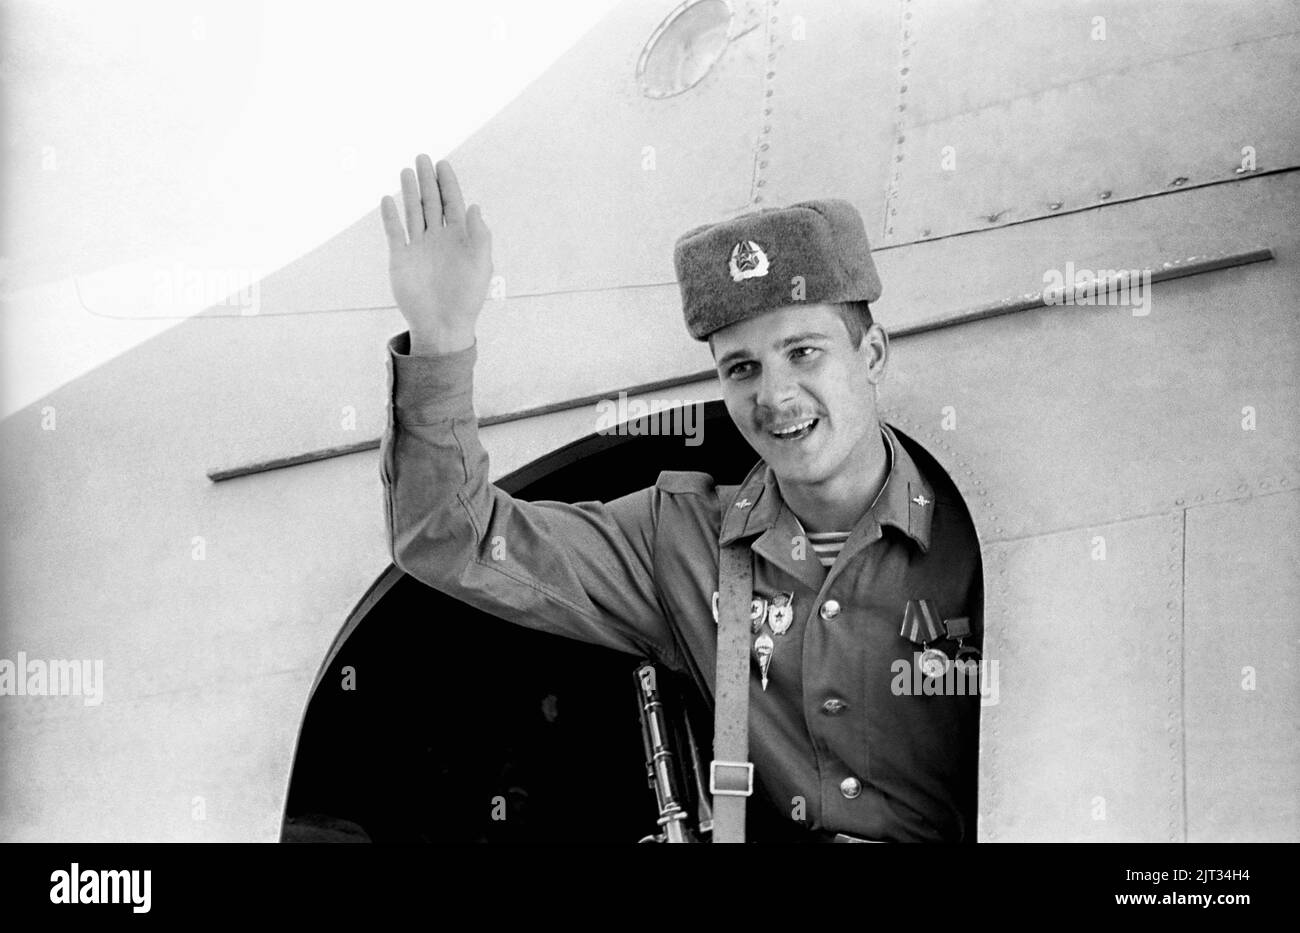 The last Soviet soldier to leave Afghanistan waves from the military transport plane at Kabul Airport, February 13, 1989 in Kabul Afghanistan. The Soviet Union pulled out the last troops ending the ten year Soviet occupation of Afghanistan. Stock Photo